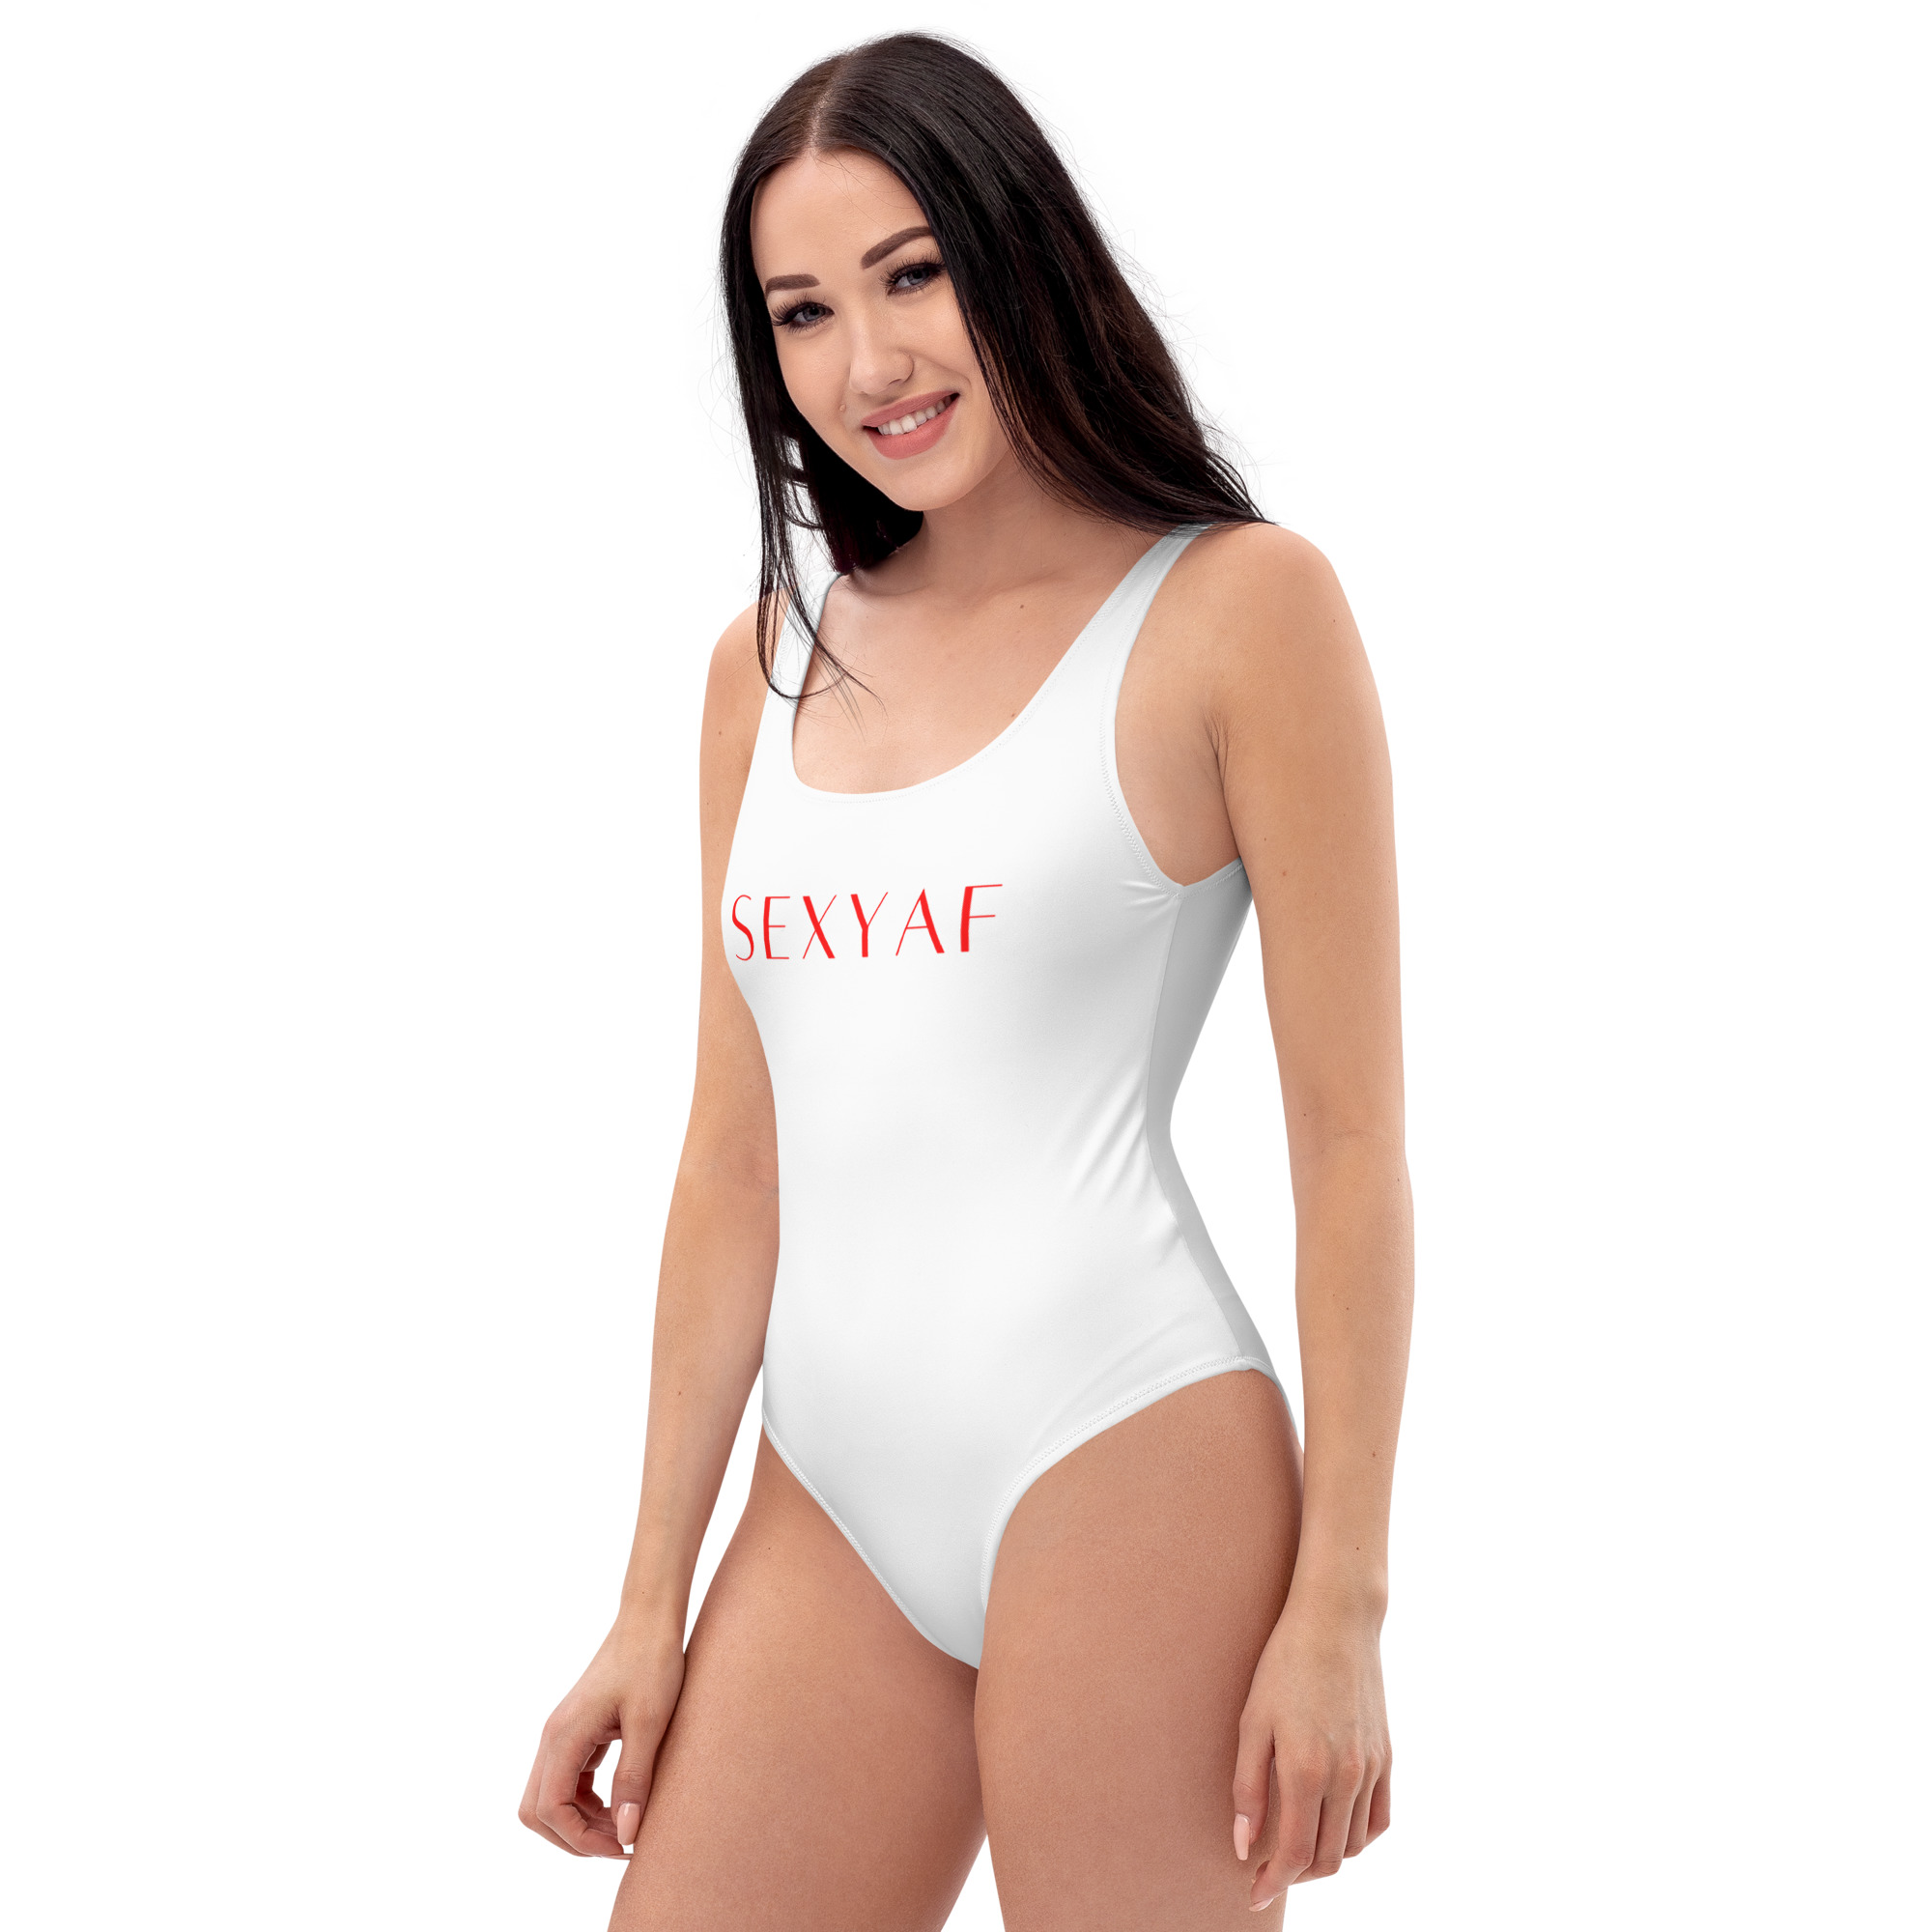 all-over-print-one-piece-swimsuit-white-left-62f432d0acc93.jpg